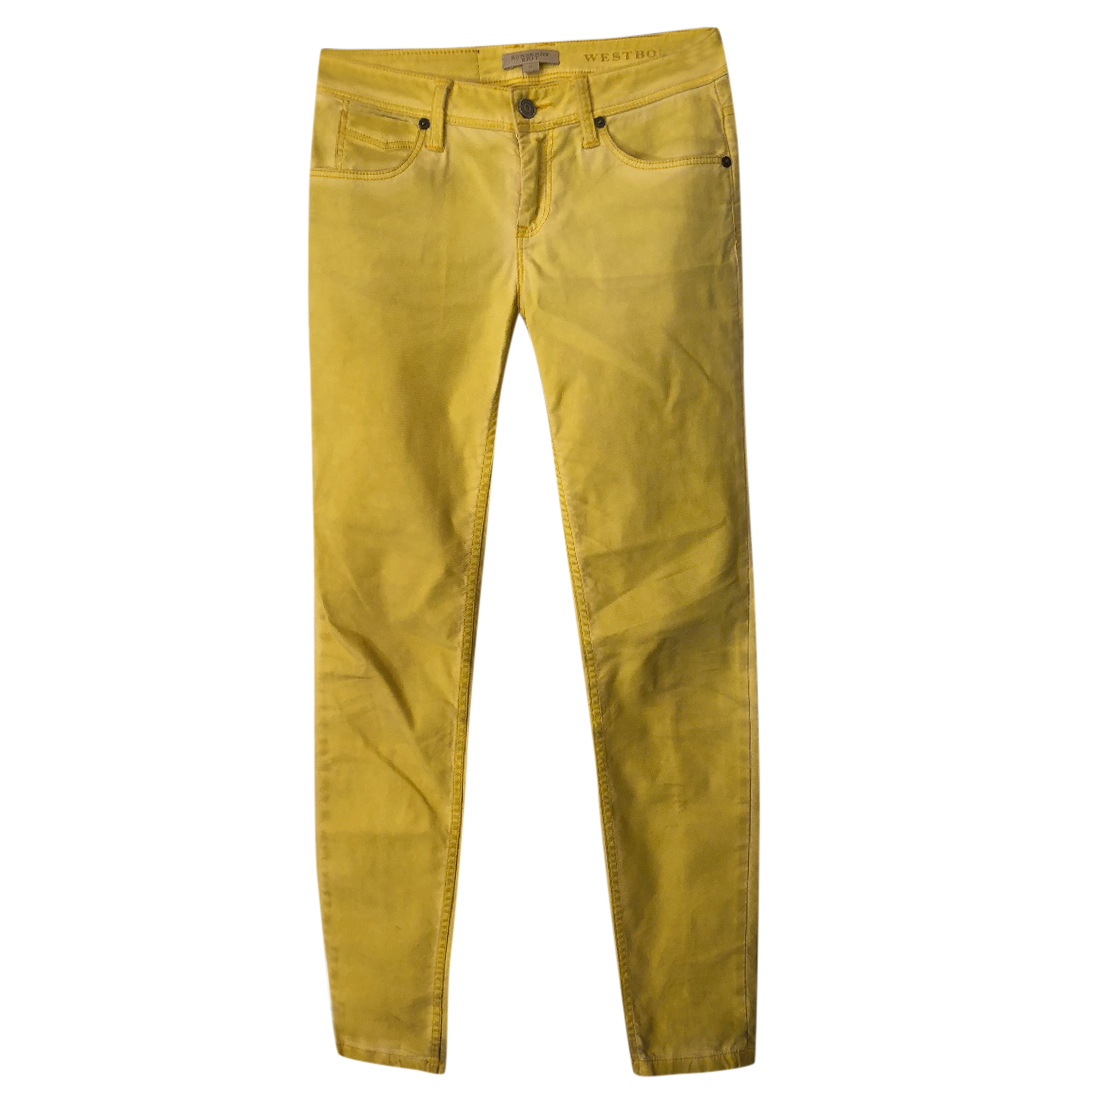 burberry jeans yellow